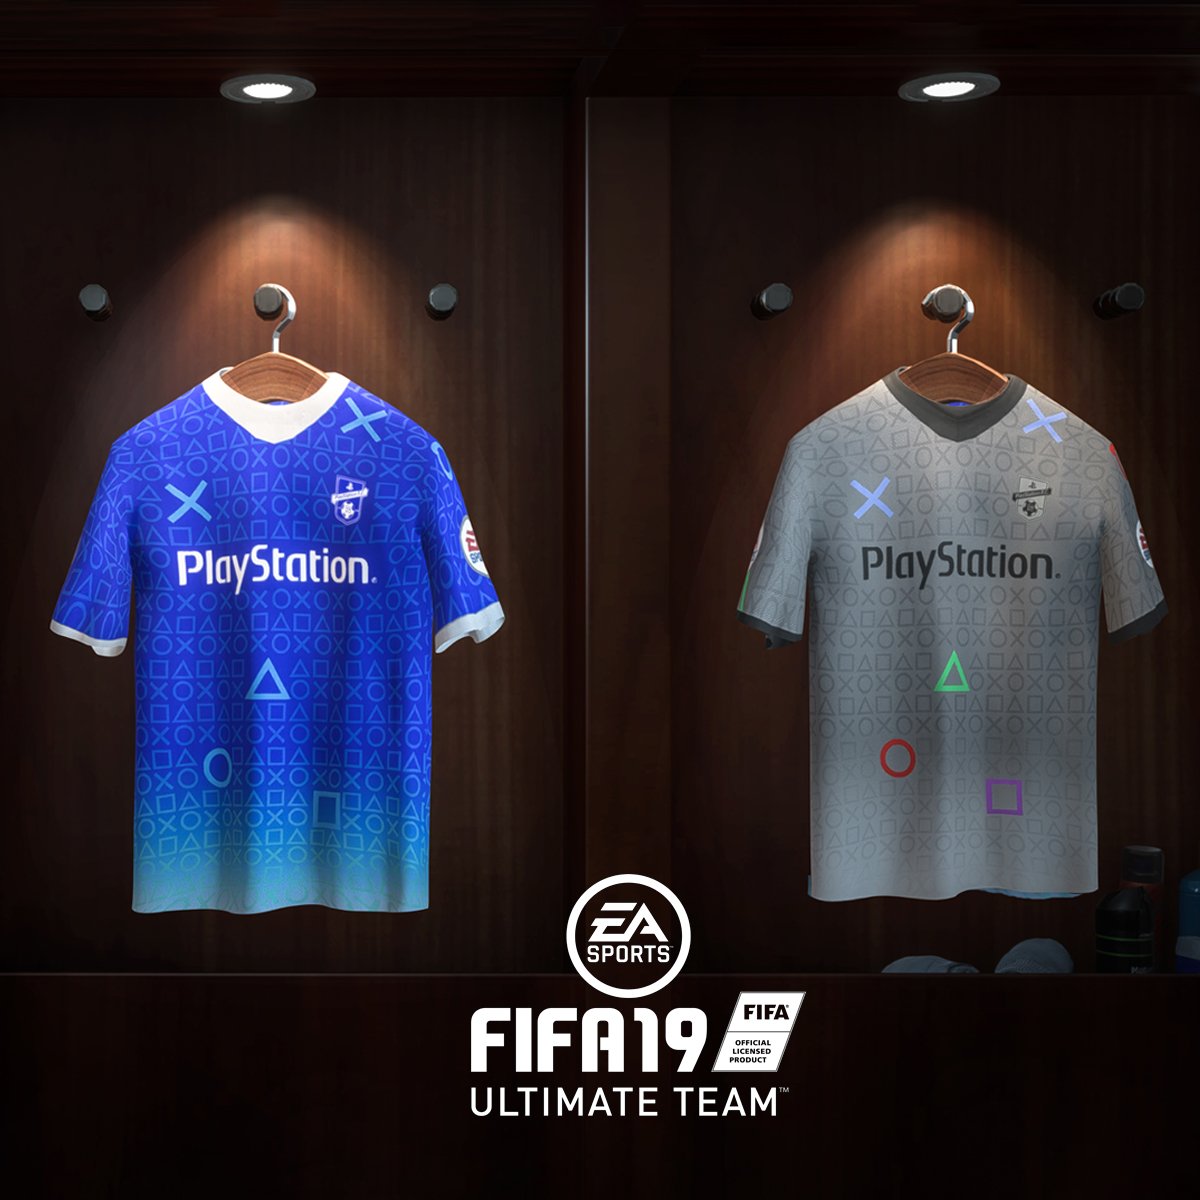 Fremme Bemærk Stereotype FIFA 19: Unveiled the exclusive PlayStation F.C. | FifaUltimateTeam.it - UK